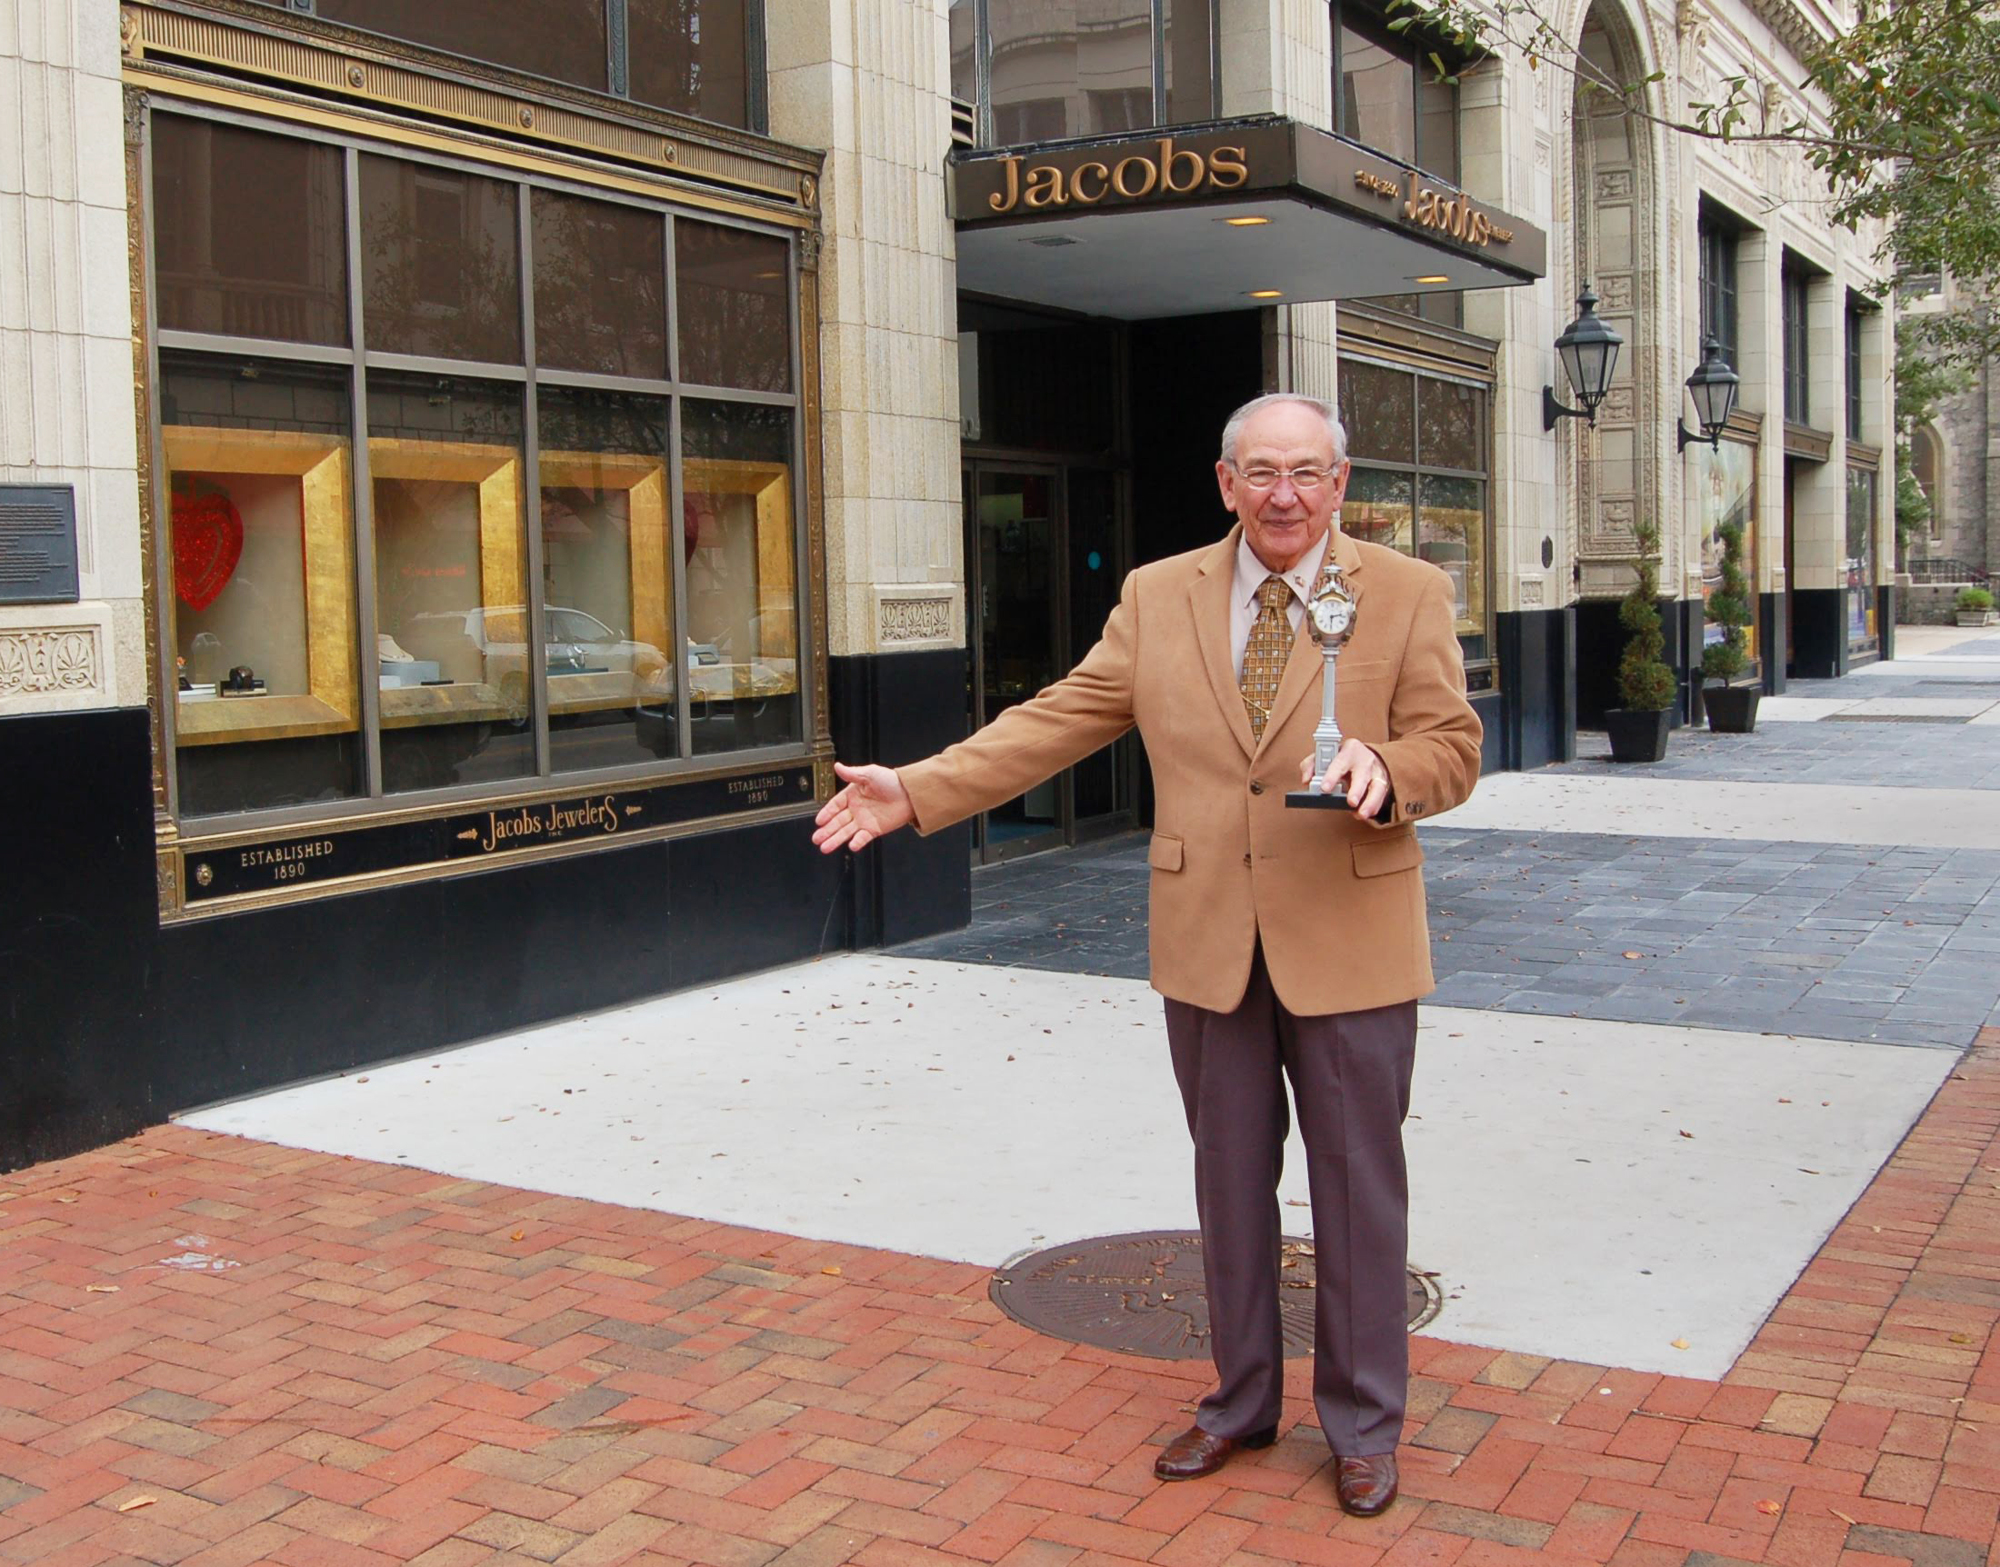 Jacobs Jewelers owner Roy Thomas stands outside his store in 2013 holding a replica of the Seth Thomas that was being refurbished.